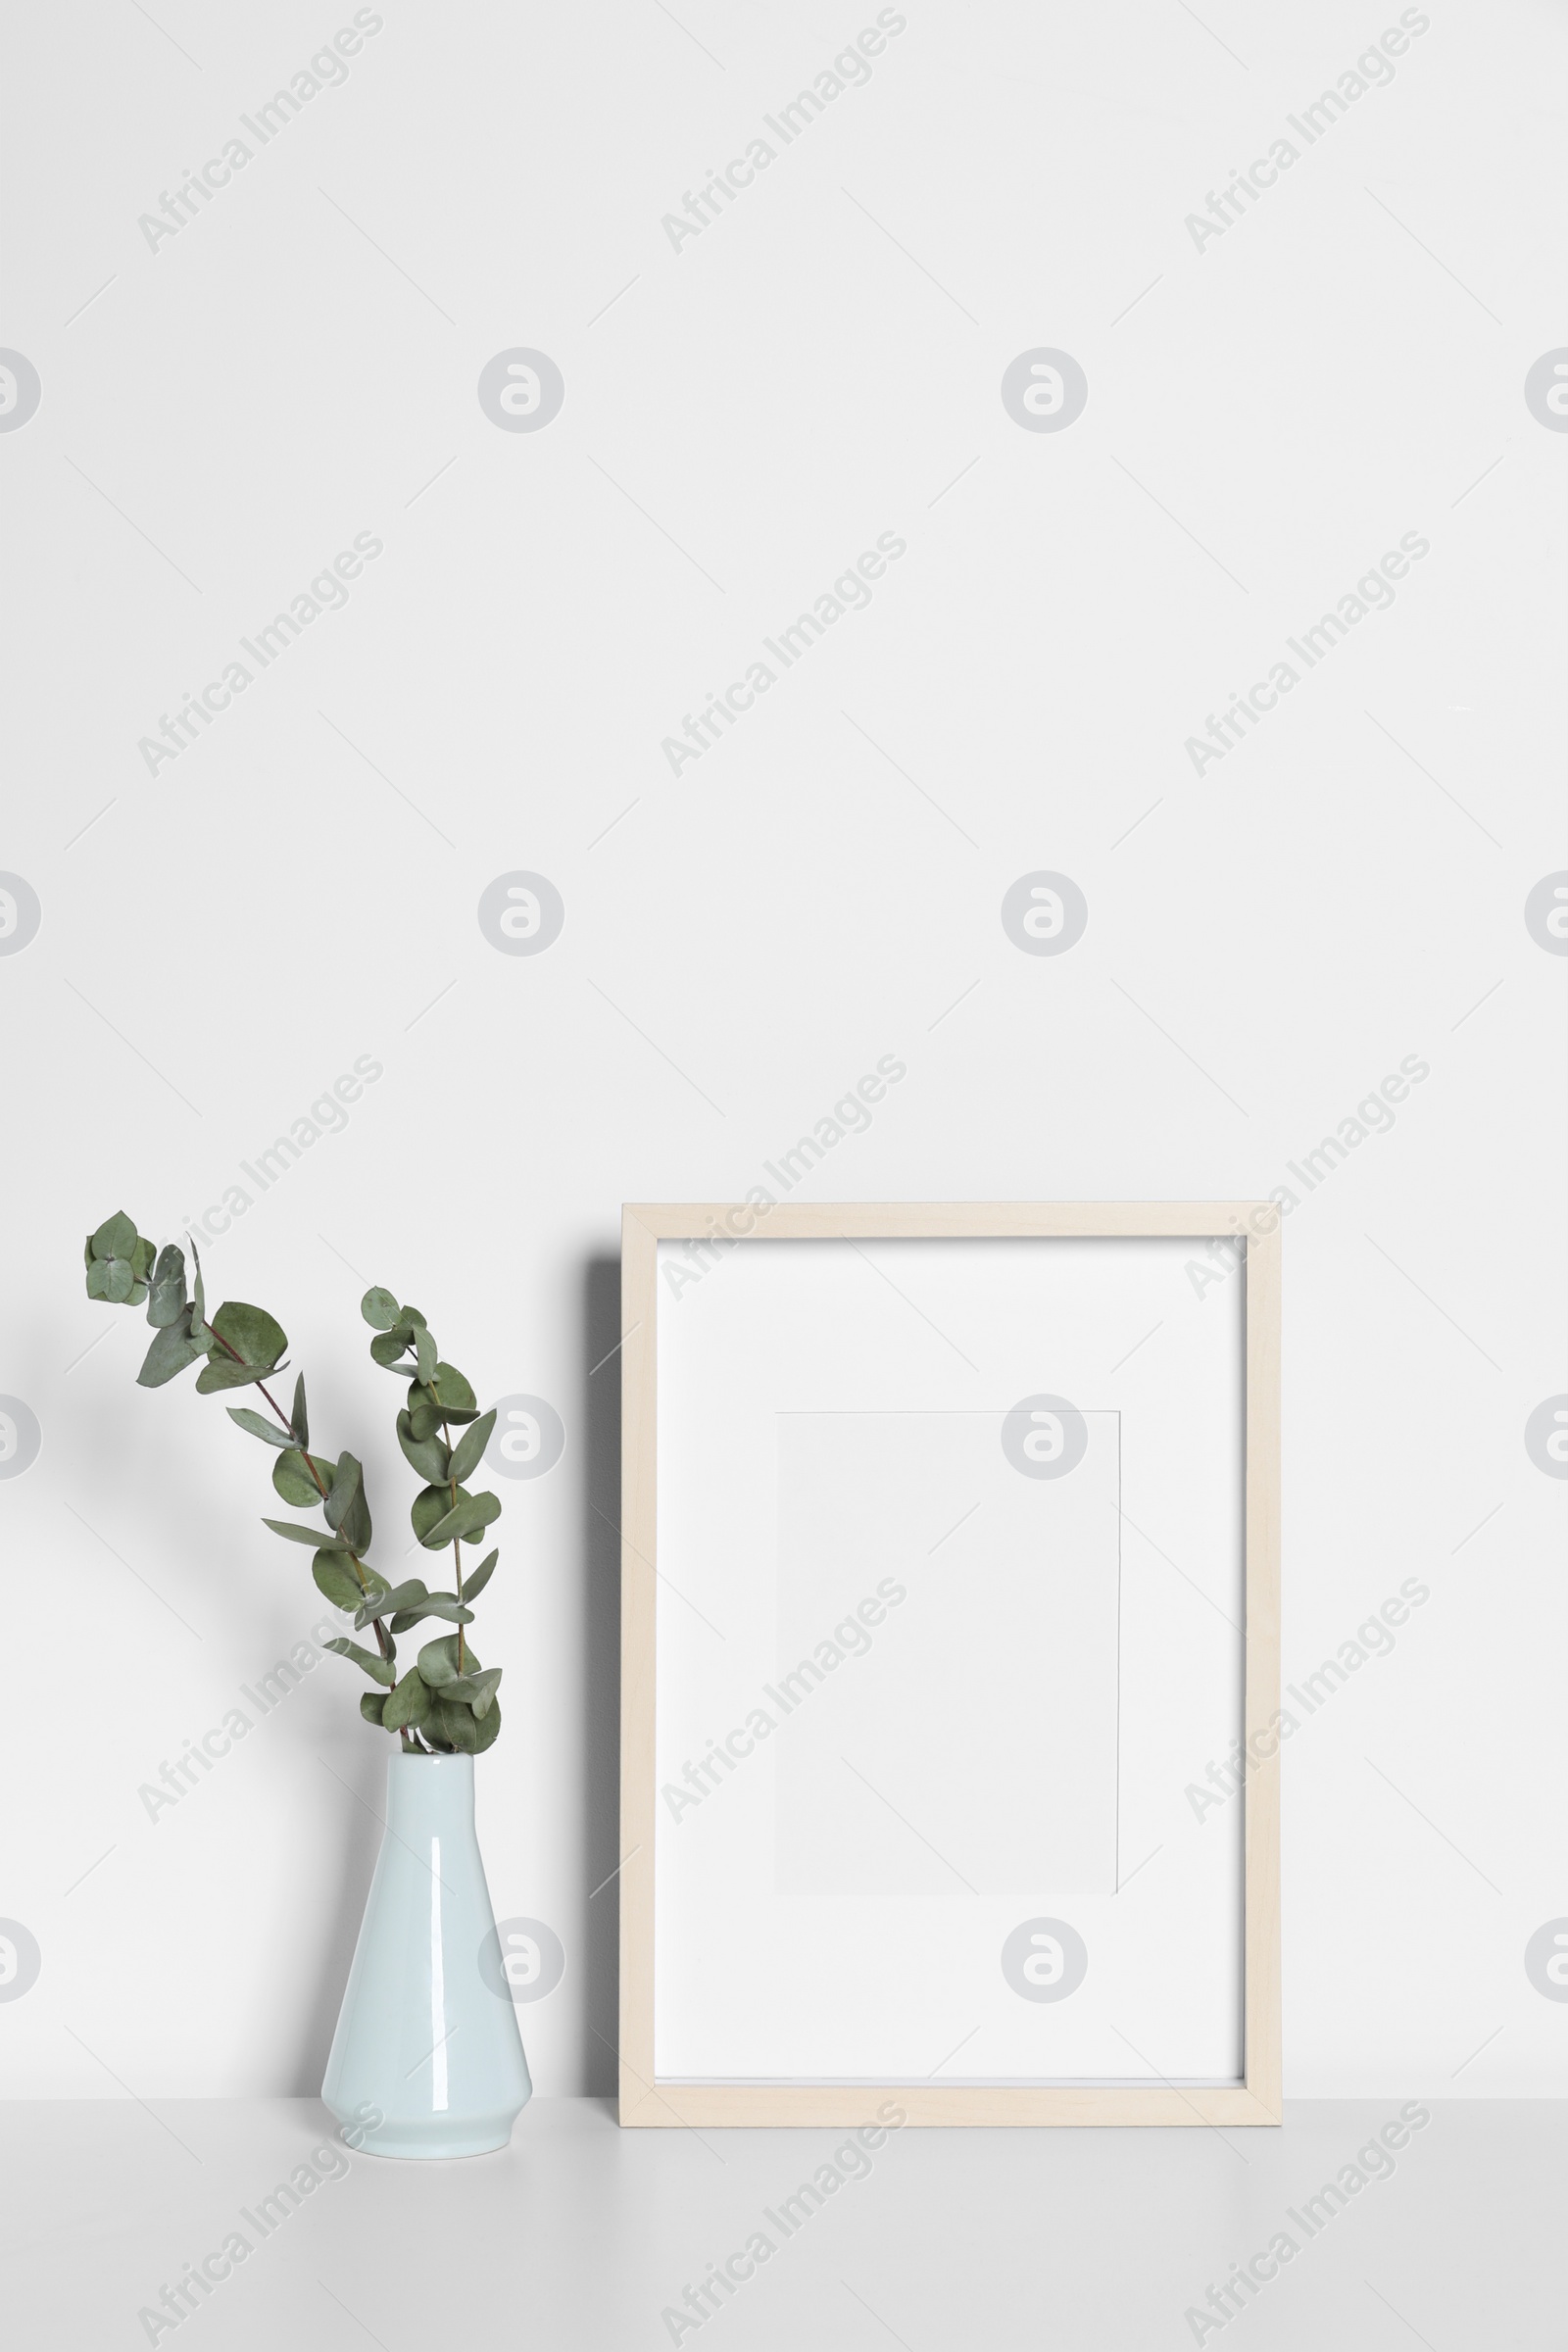 Photo of Empty photo frame and vase with decorative eucalyptus leaves on white table. Mockup for design